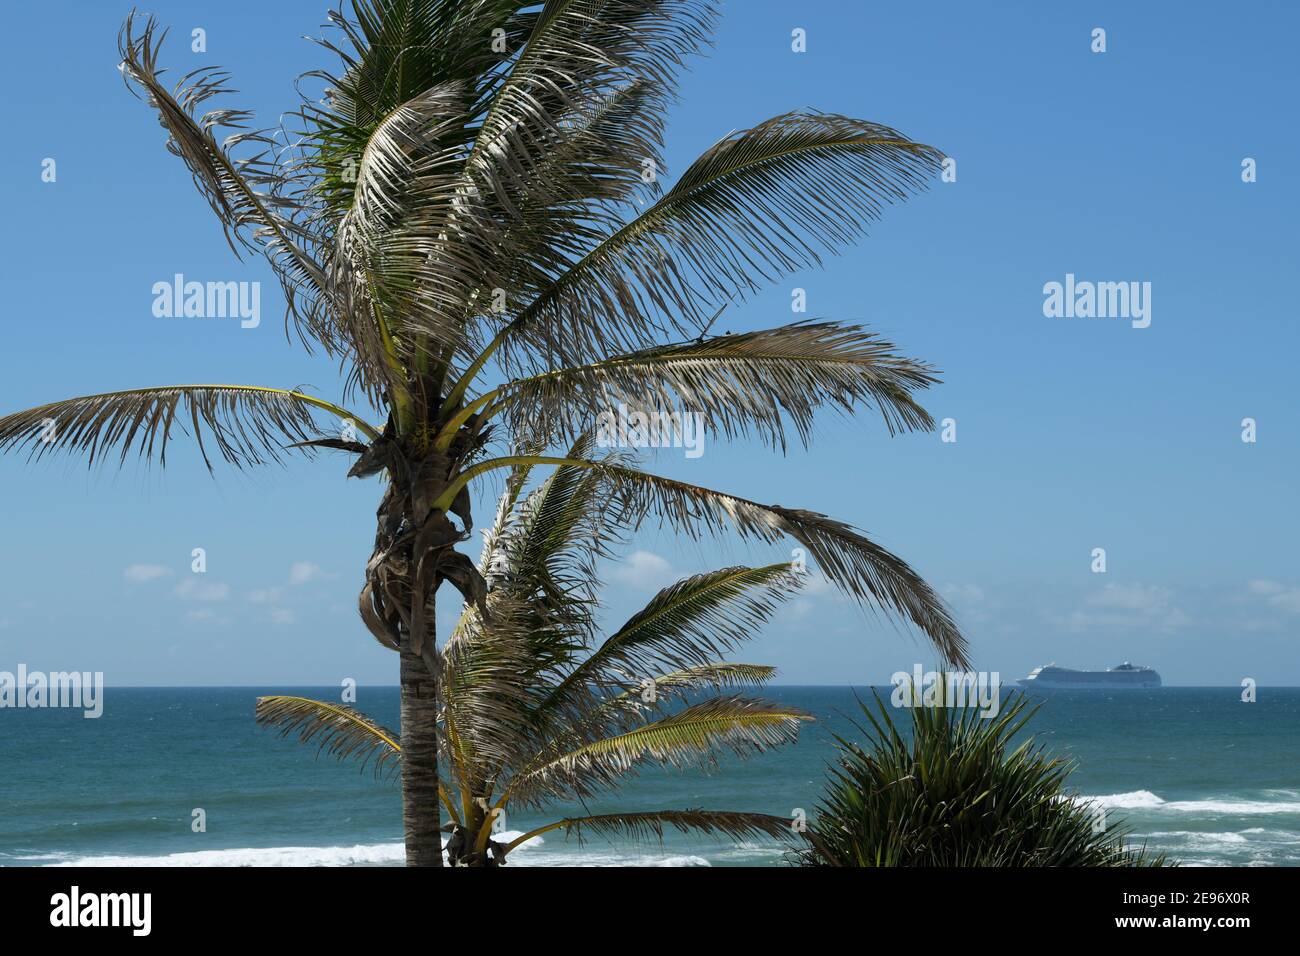 Dream holiday, palm trees, blue sky background, cruise ship on horizon, landscapes, seascapes, travel concepts, Durban, South Africa, illustration Stock Photo